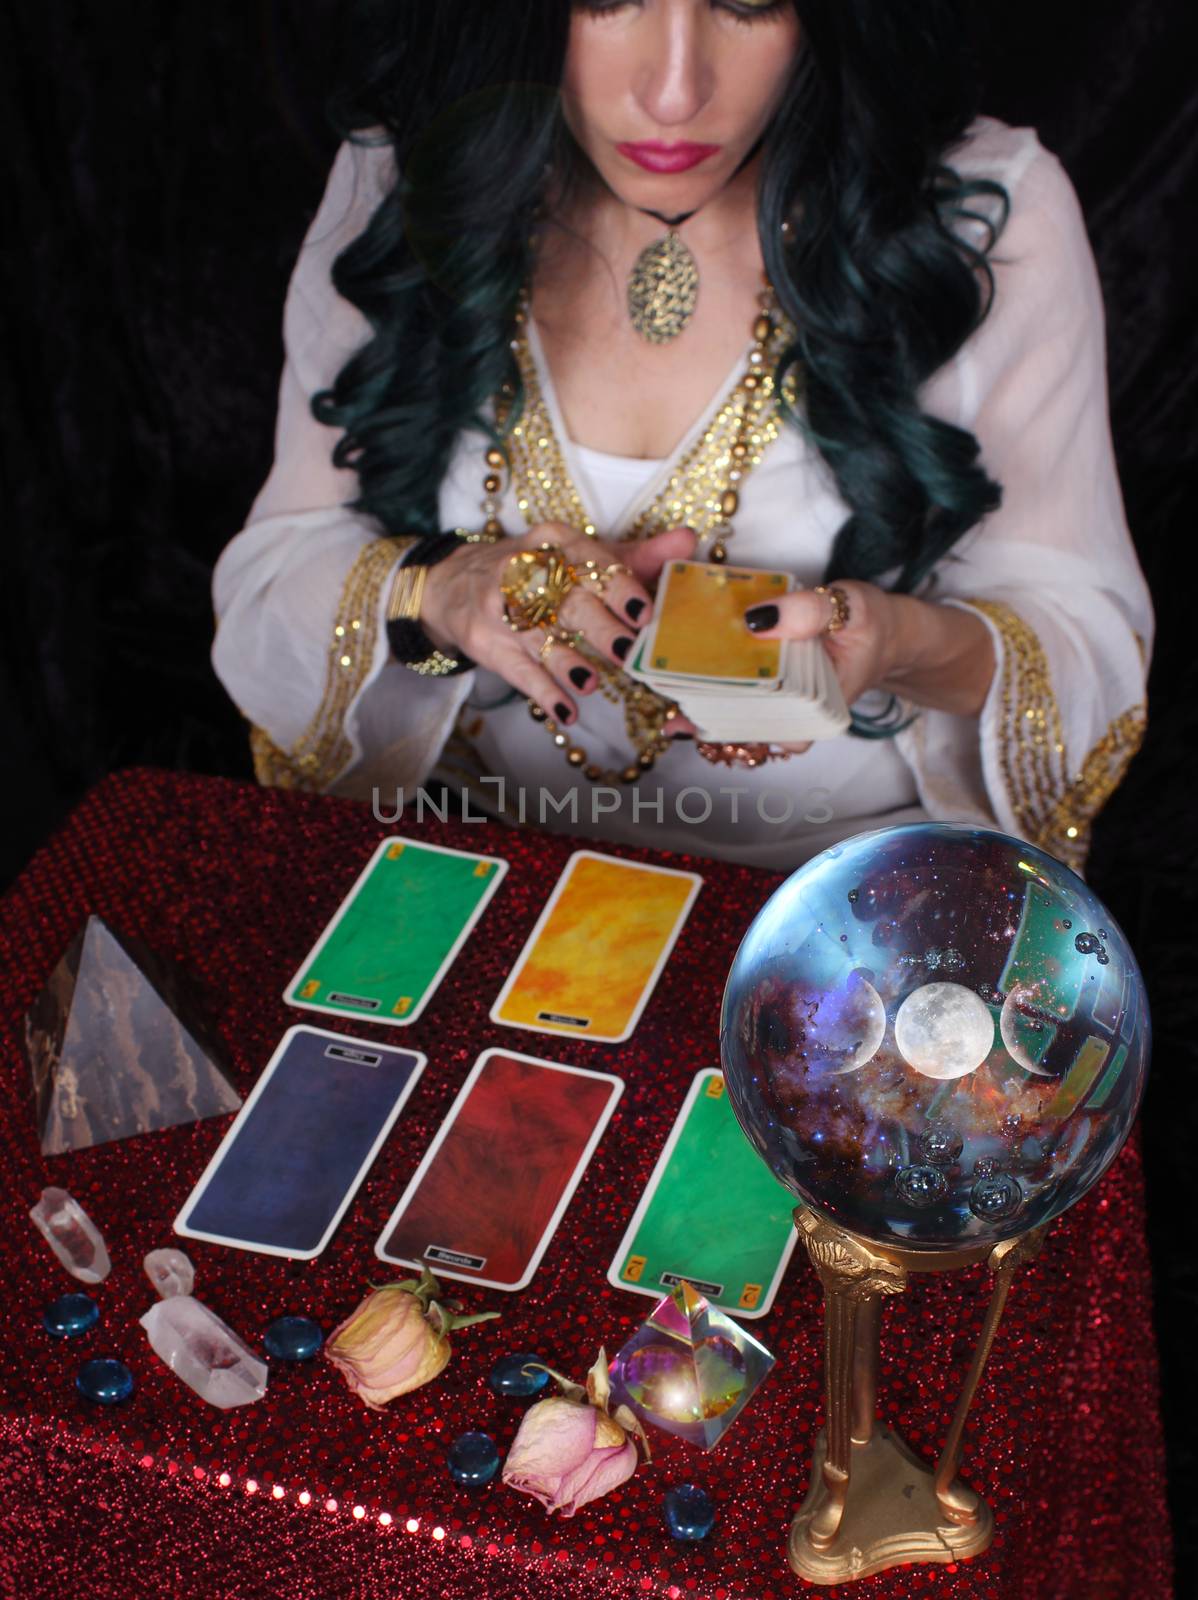 Psychic with green hair  Crystal Ball and tarot cards by Marti157900